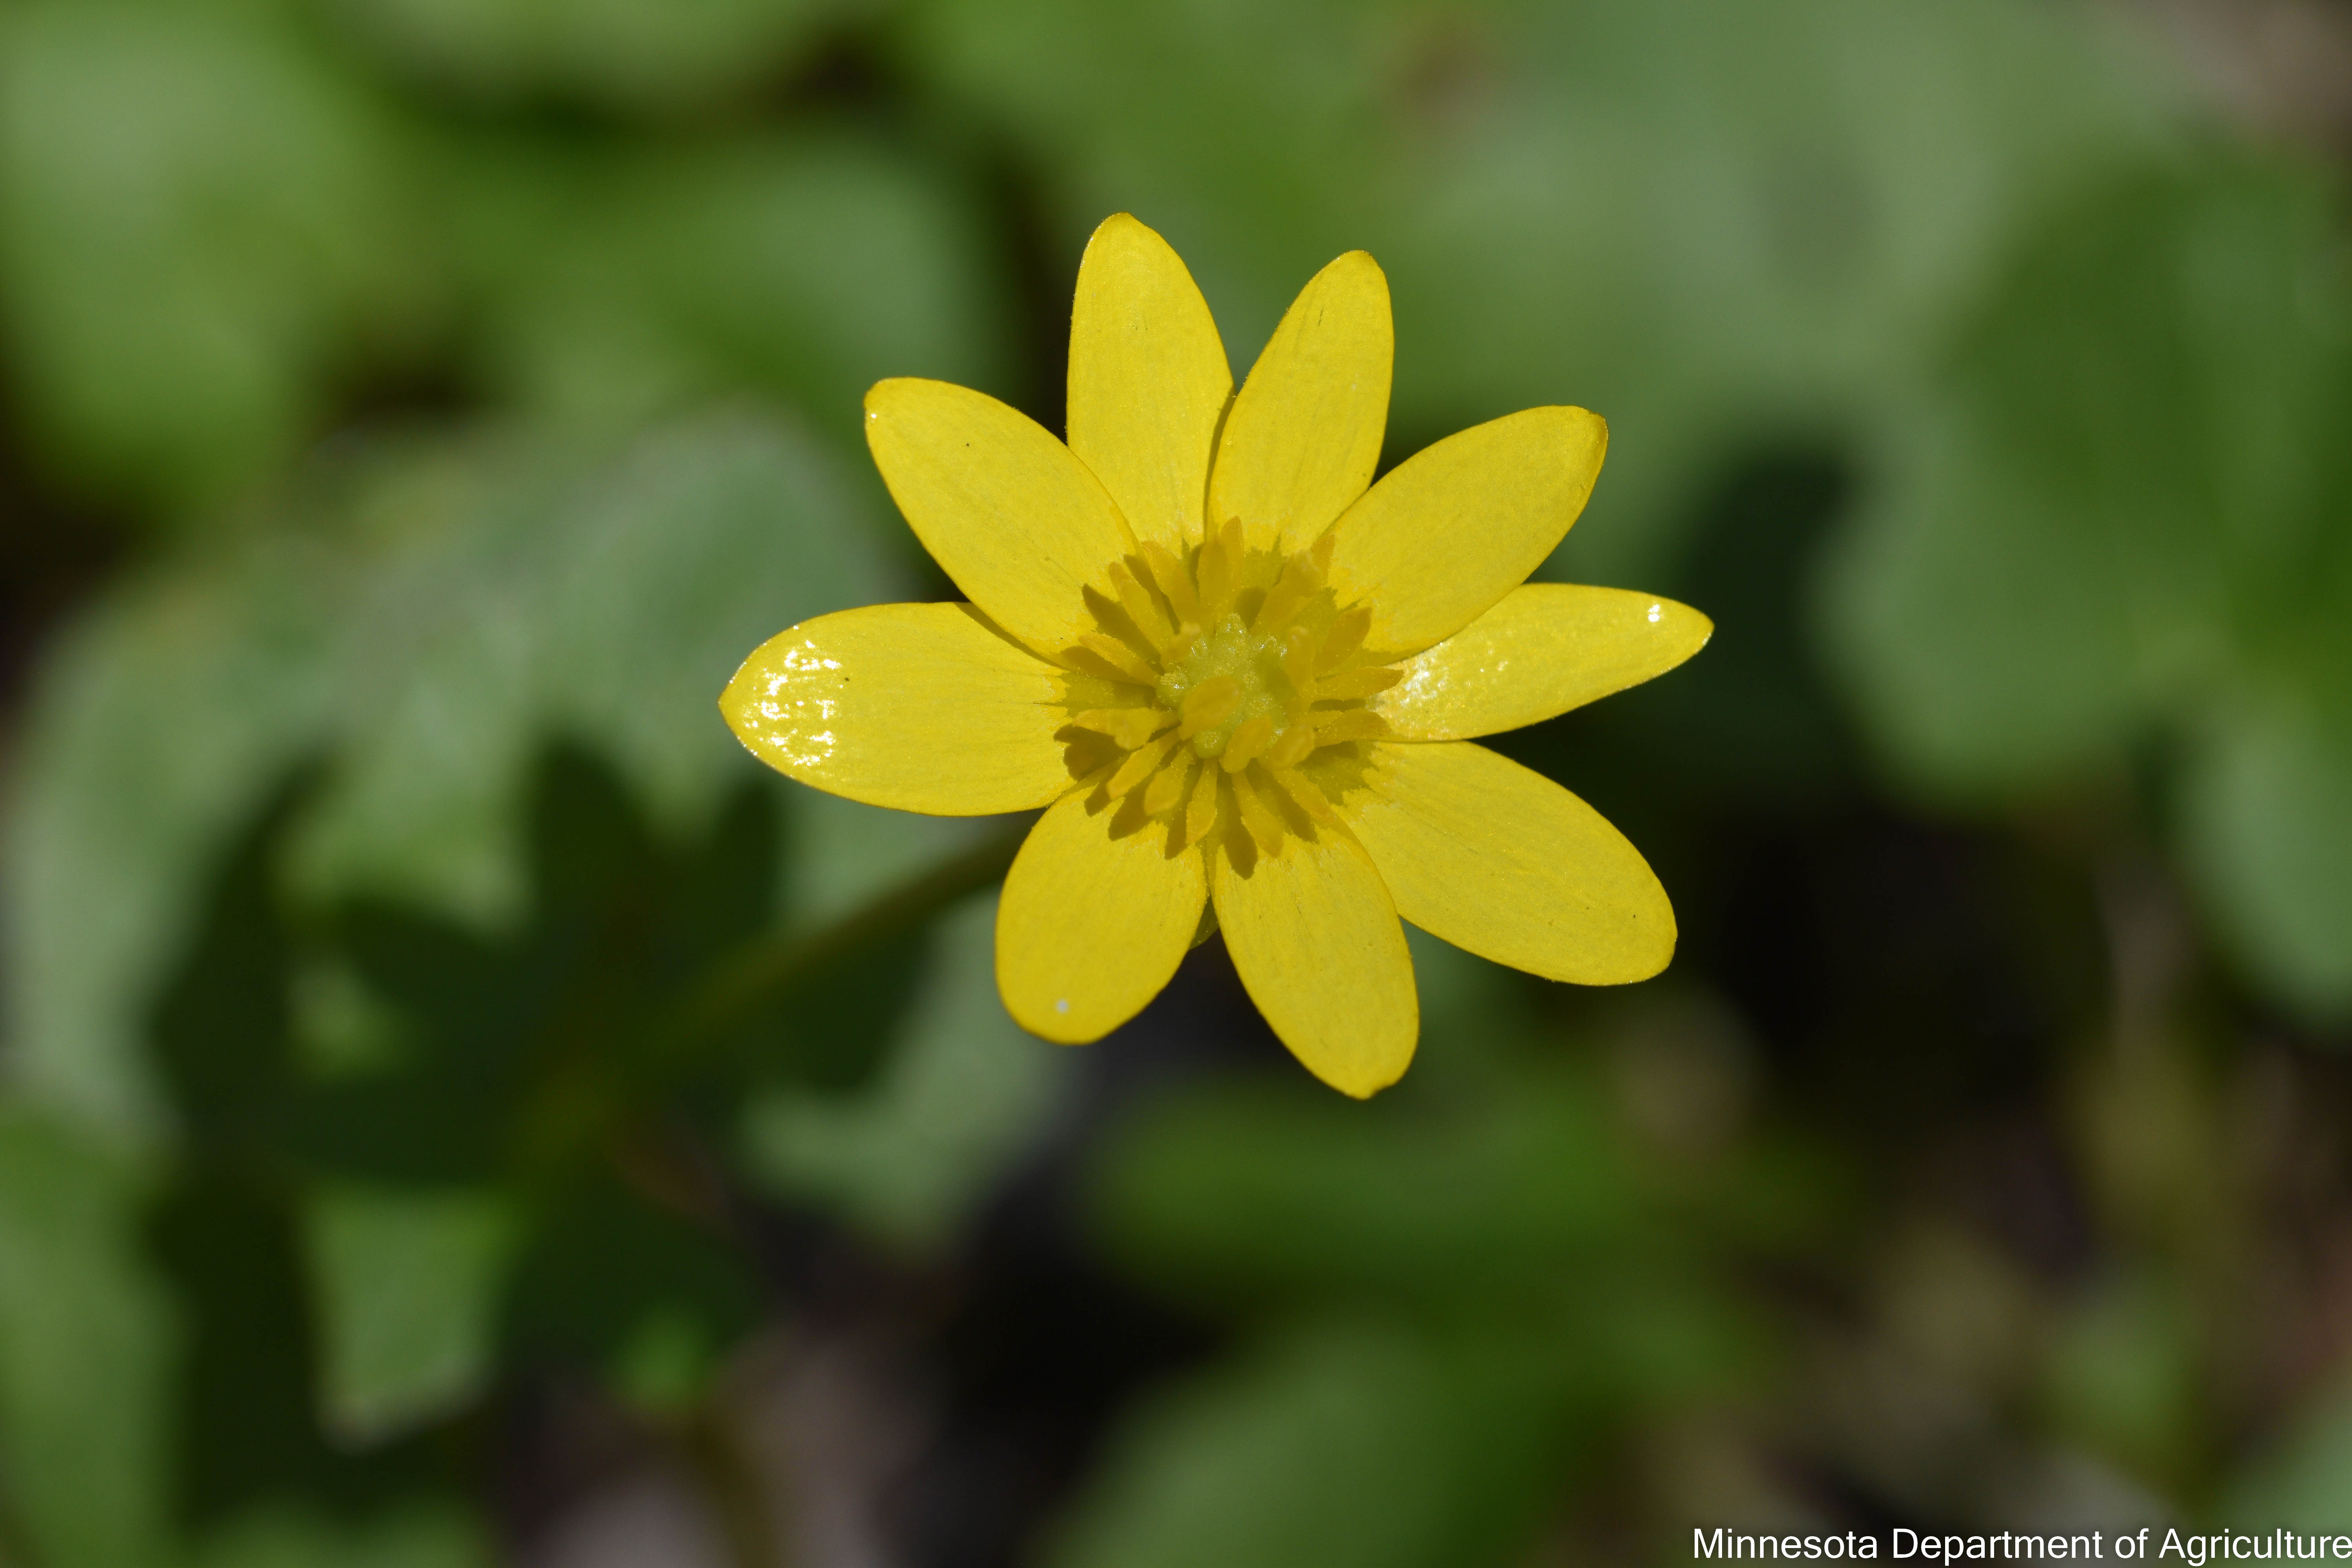 A close-up photo of a small, bright yellow glossy flower with nine petals.